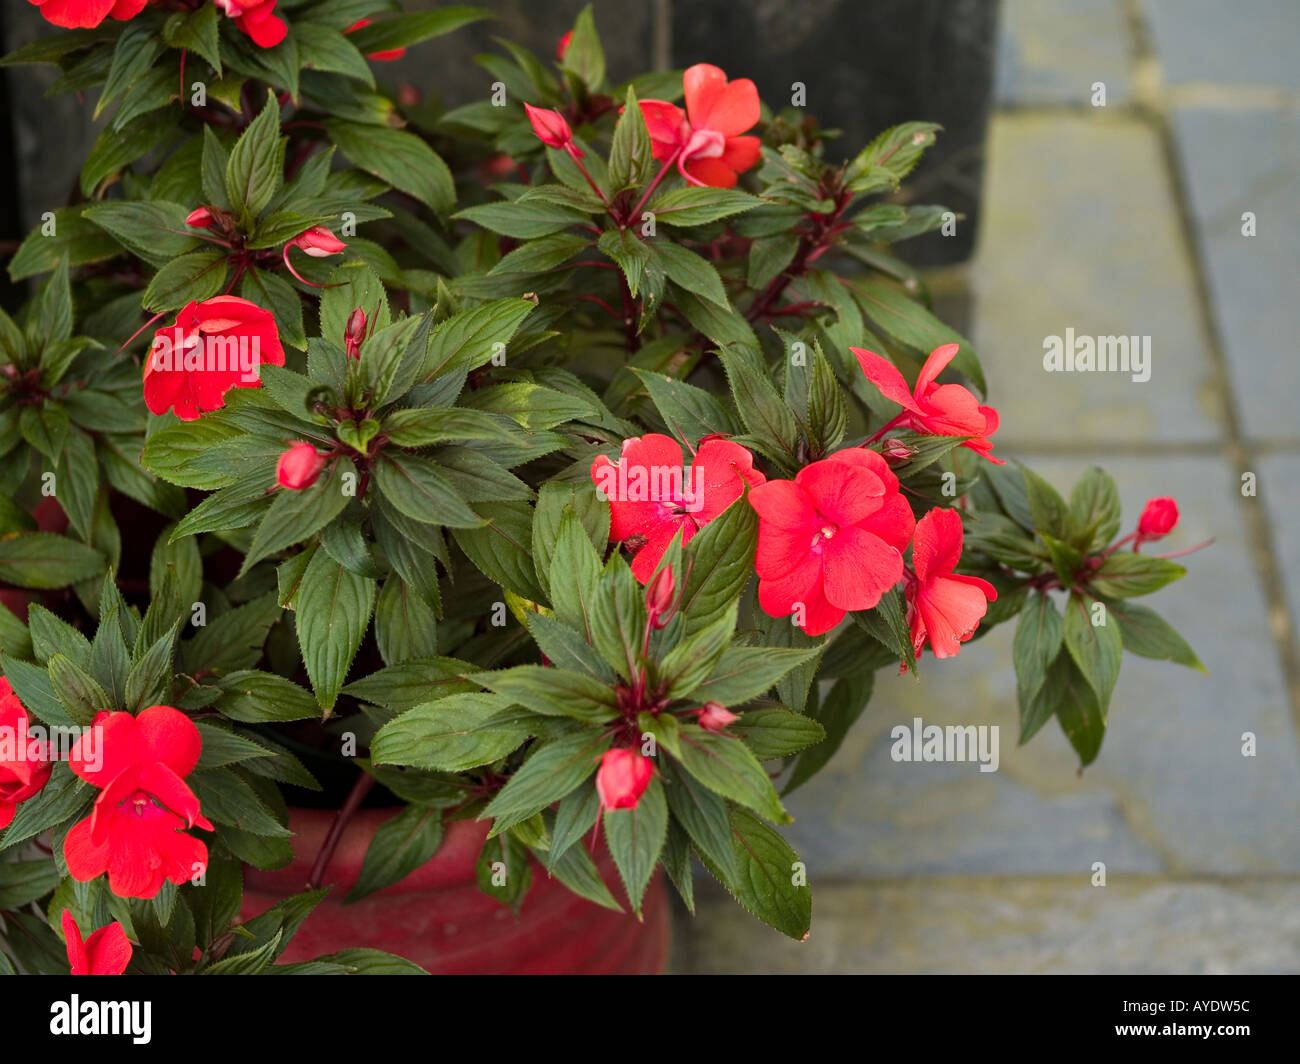 Pot of lush red New Guinea impatiens in hothouse Stock Photo